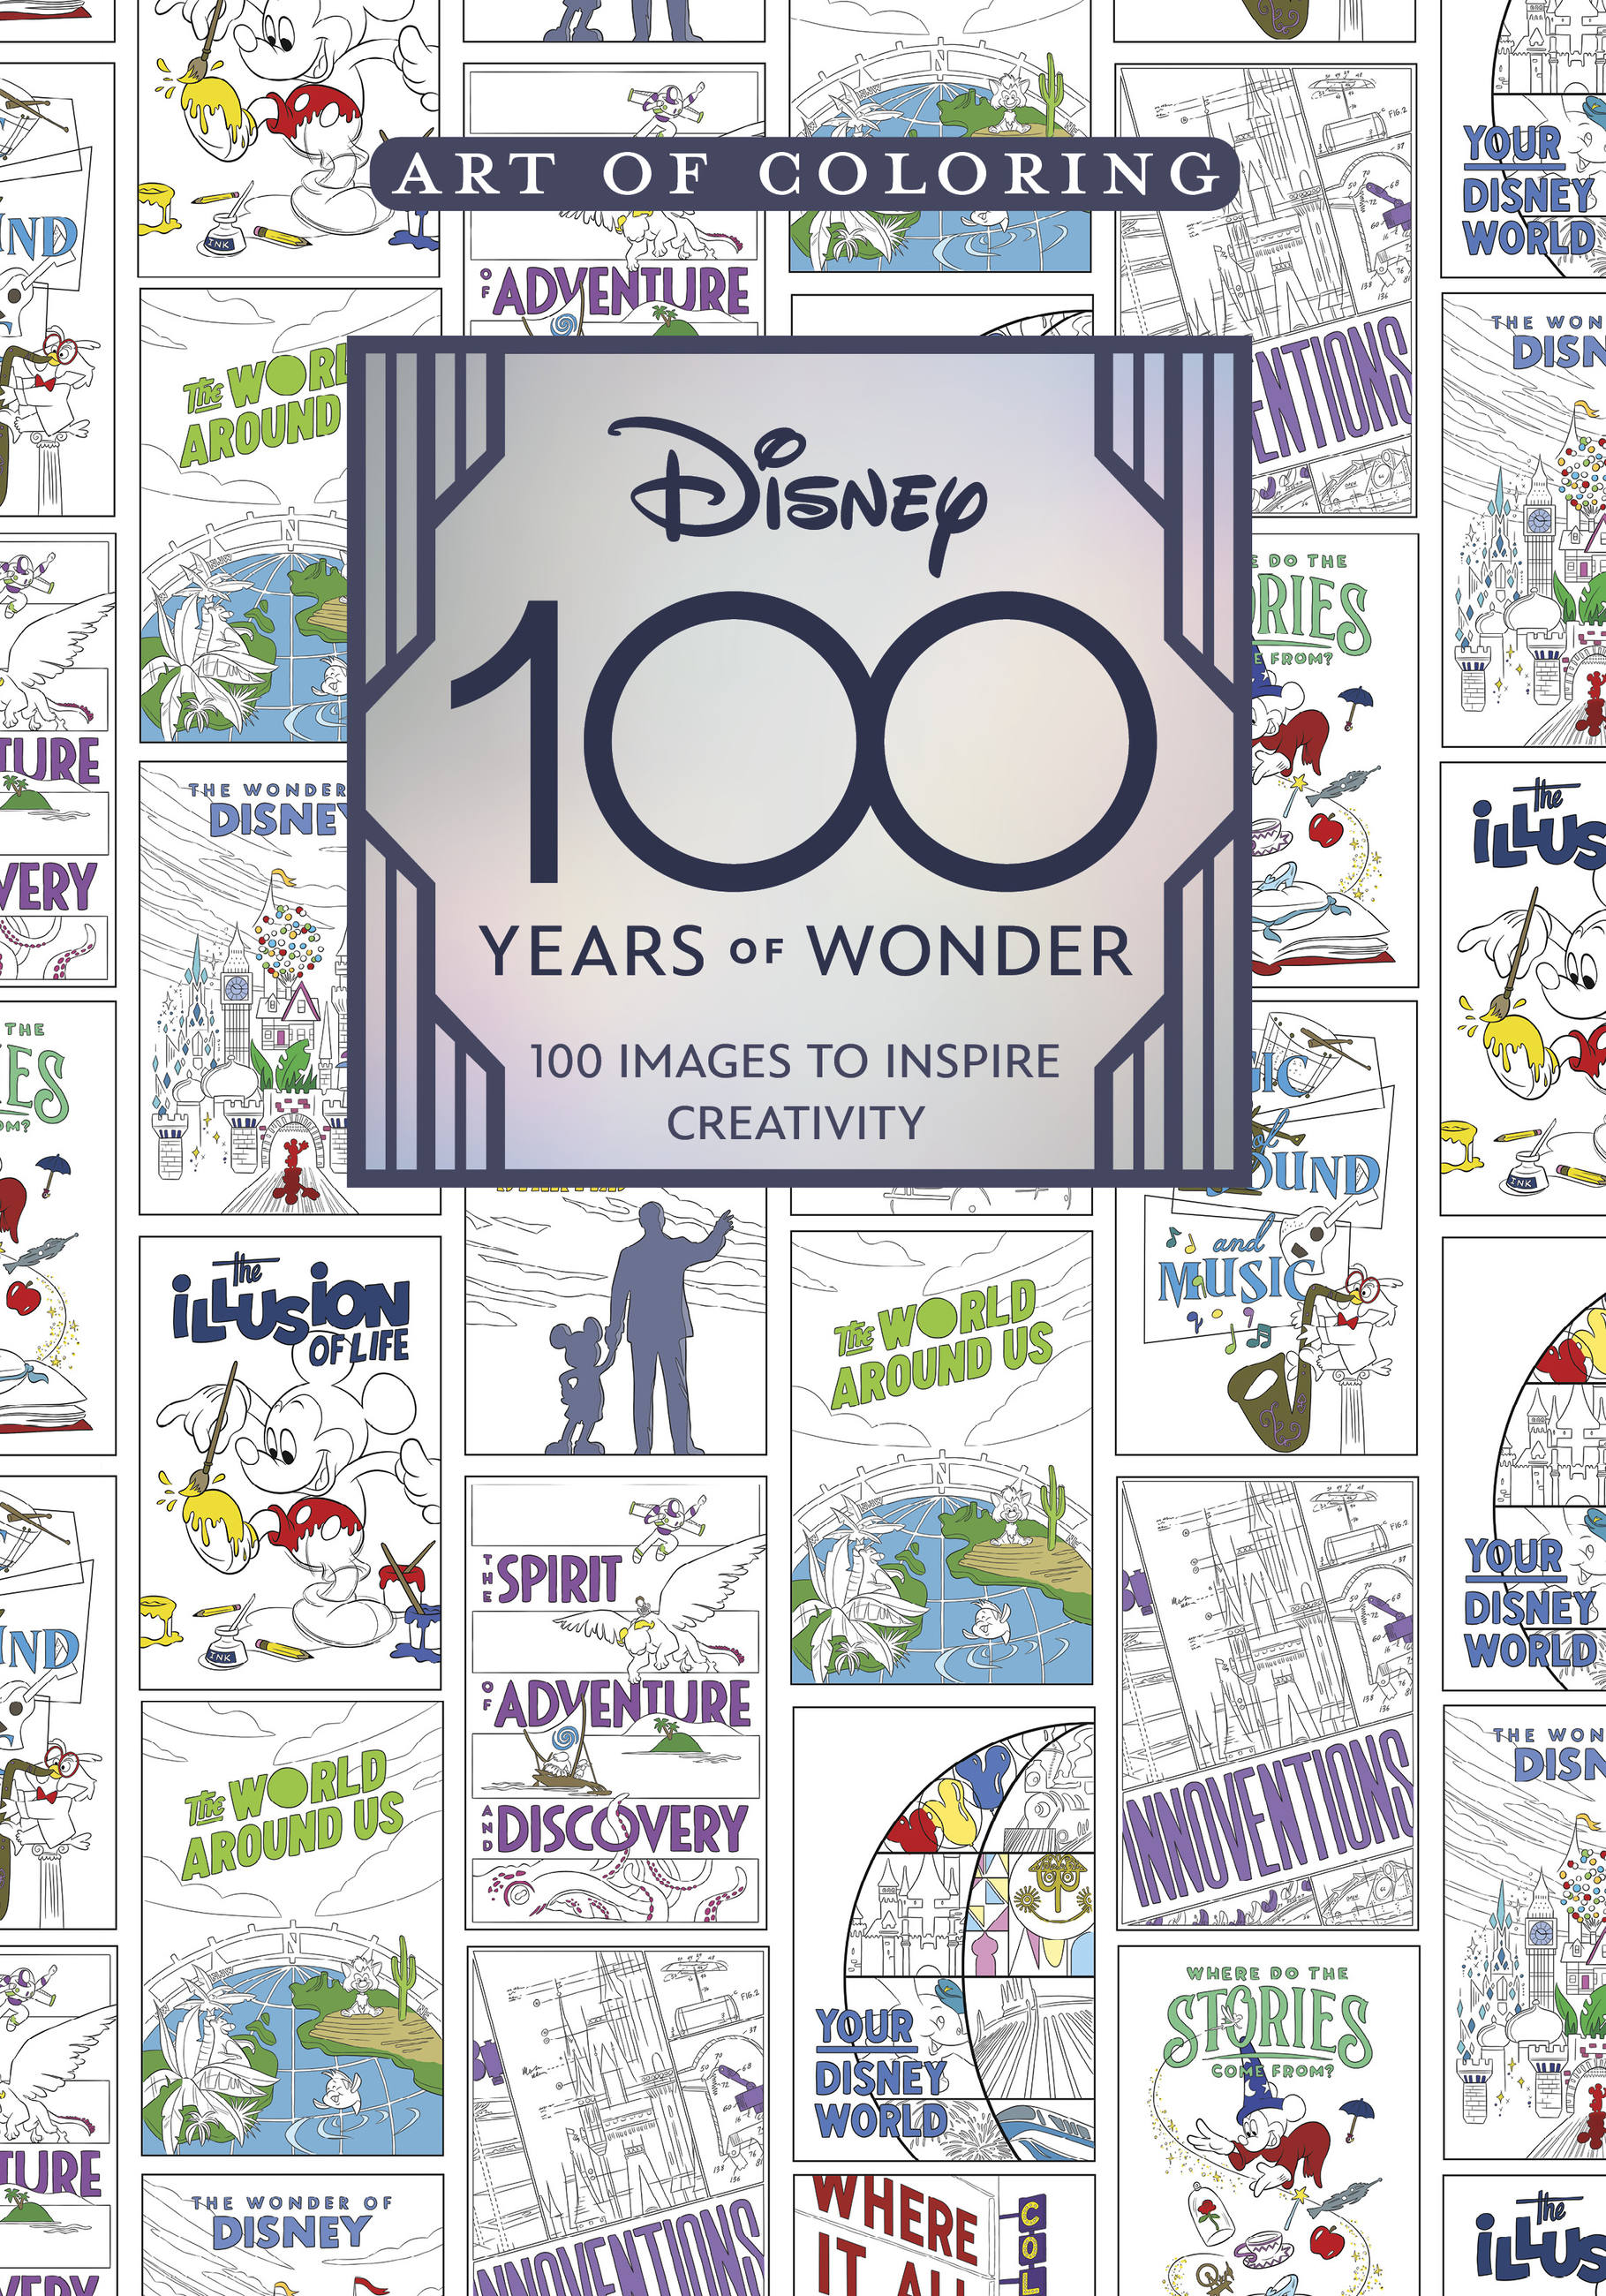 Art of Coloring: Disney 100 Years of Wonder : 100 Images to Inspire Creativity | Staff of the Walt Disney Archives